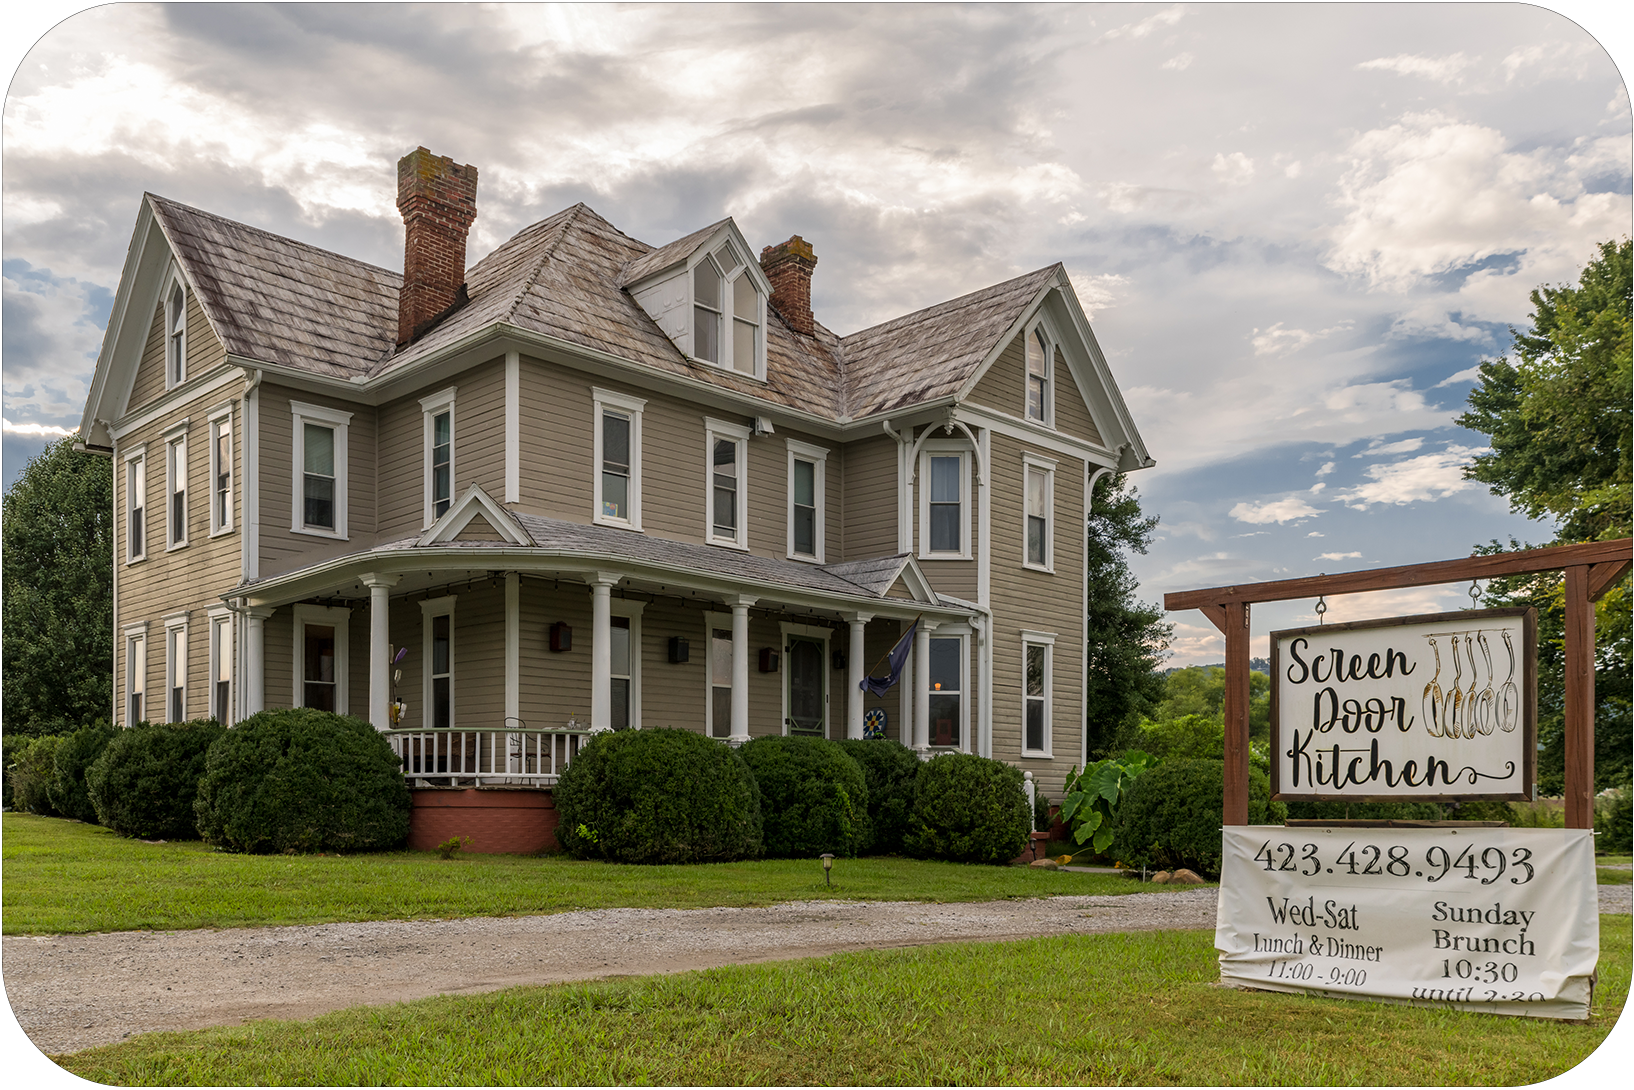 Restaurant by Riverside Bed and Breakfast in Soddy Daisy, Tennessee